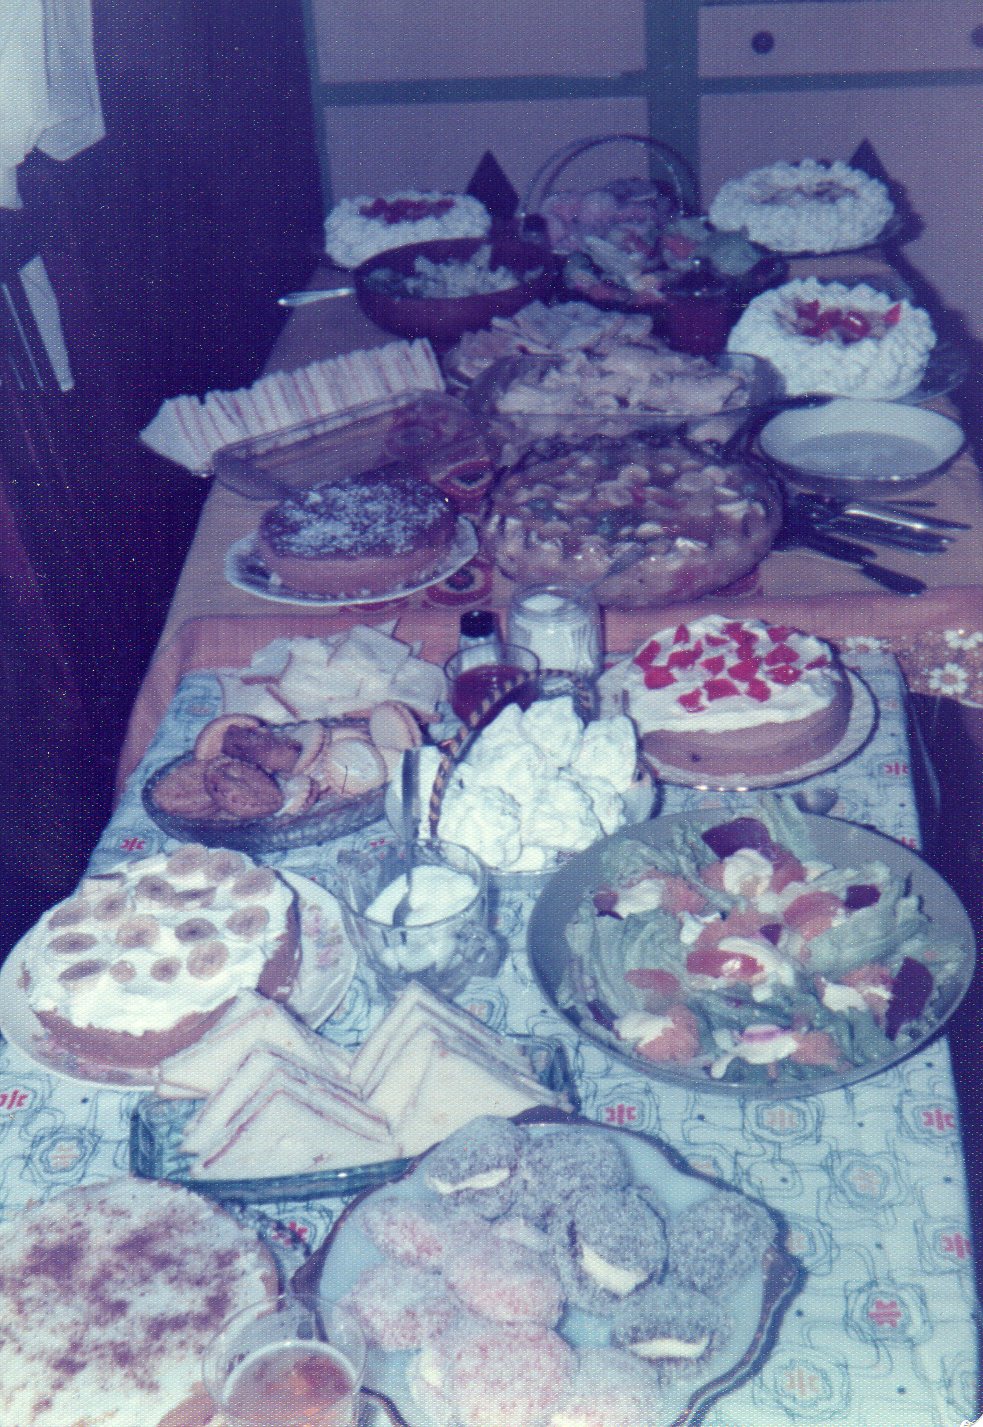 34 Table of cakes.jpg